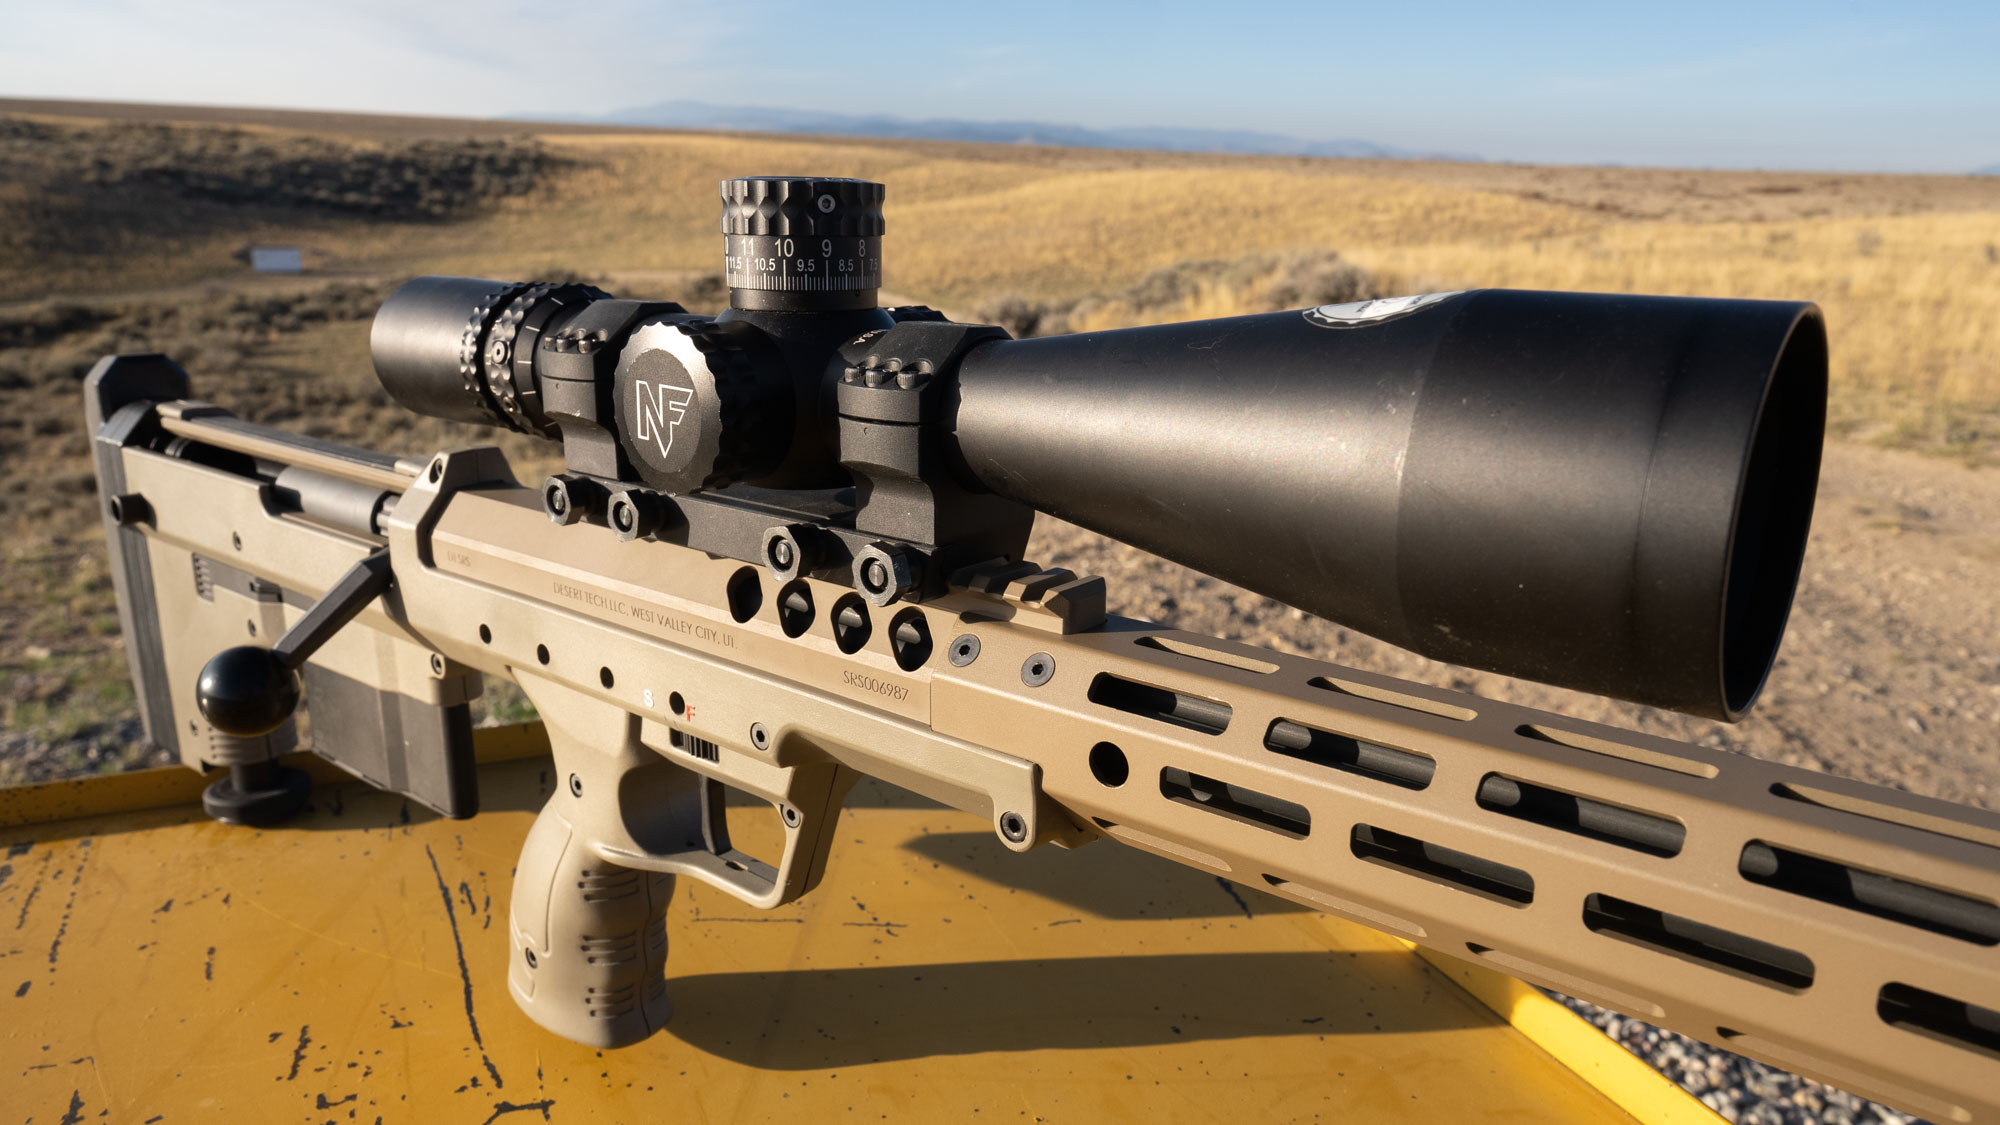 Nightforce scope mounted on a desert tech srs a2 rifle at the shooting range